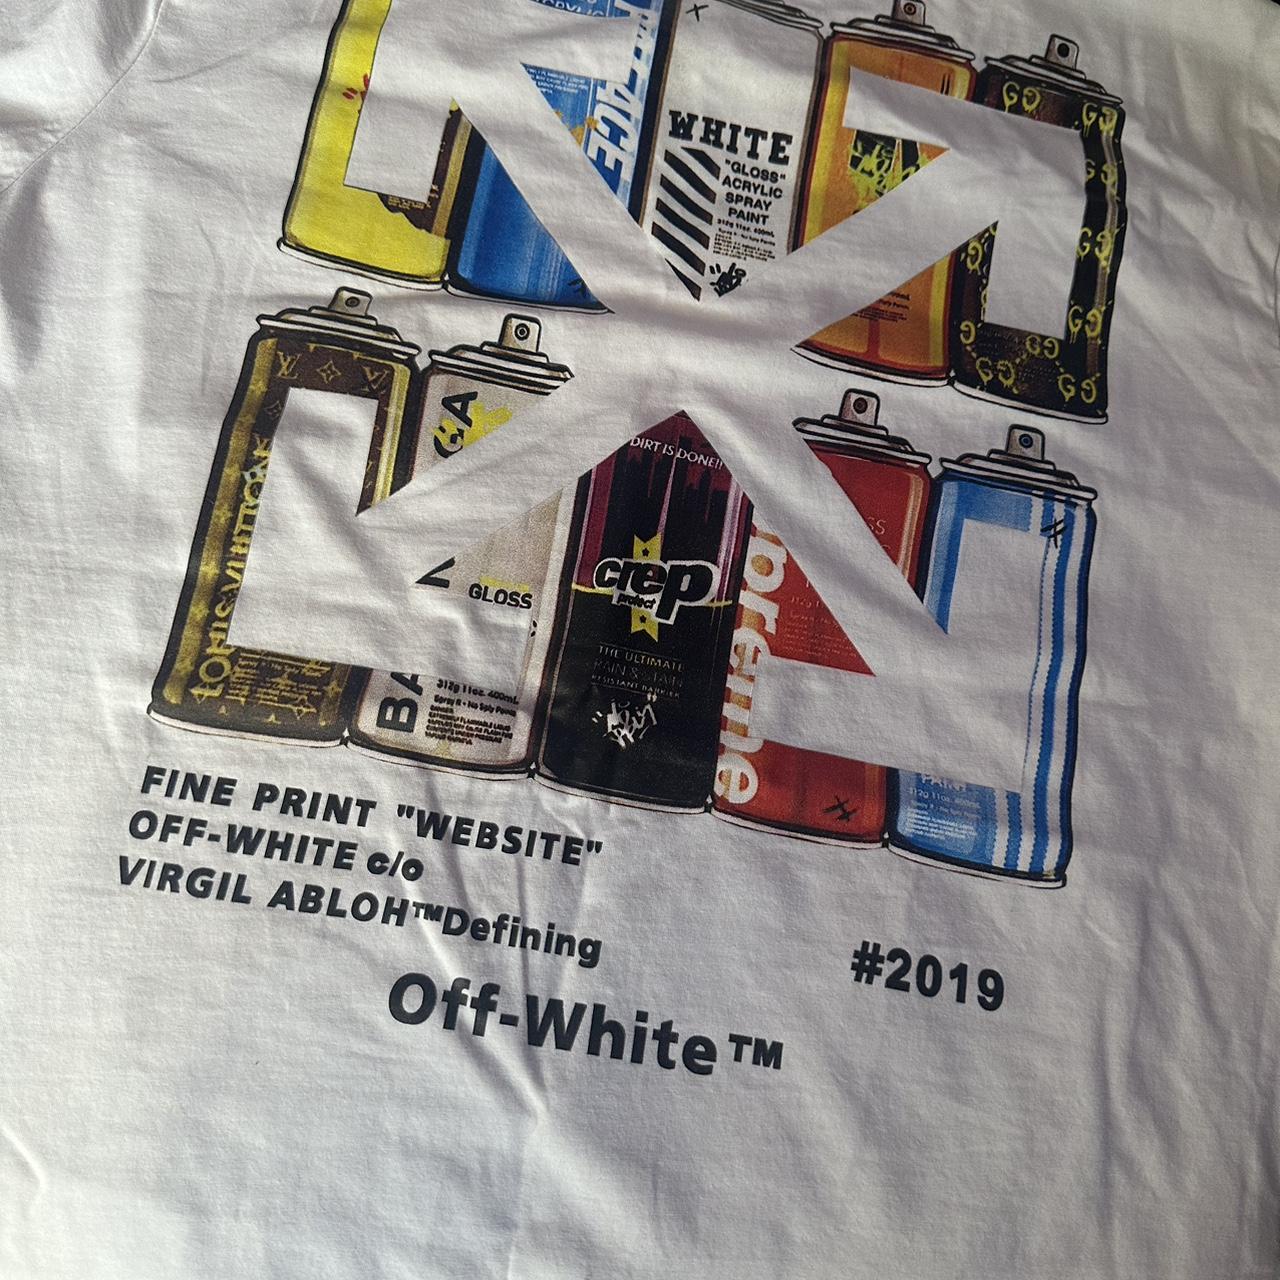 UNISEX M TEE 2019 OFF Depop Fits WHITE well - White